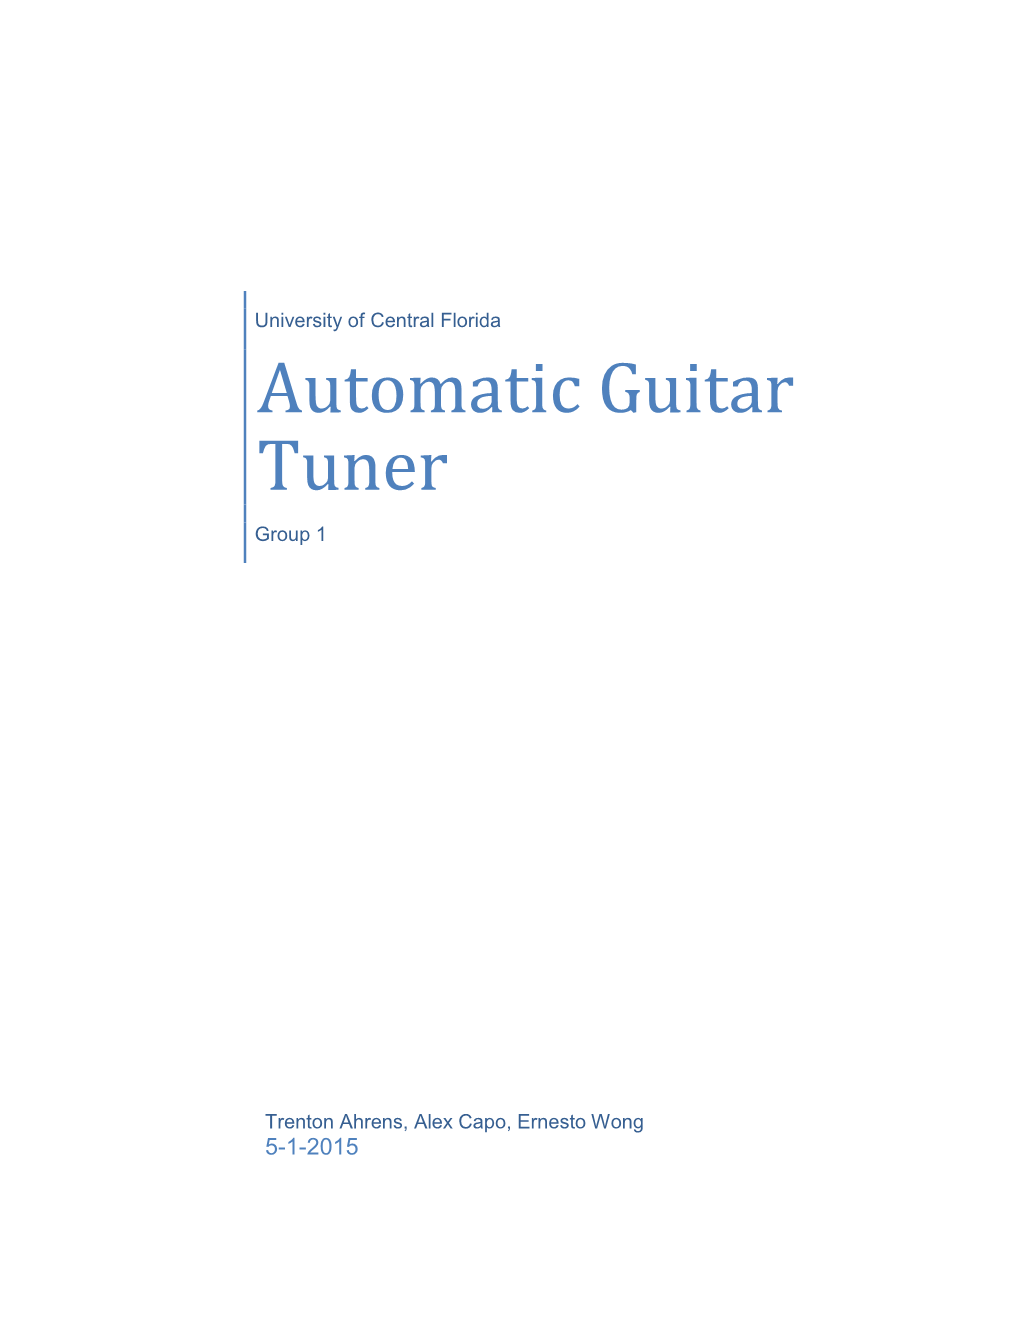 Automatic Guitar Tuner Group 1